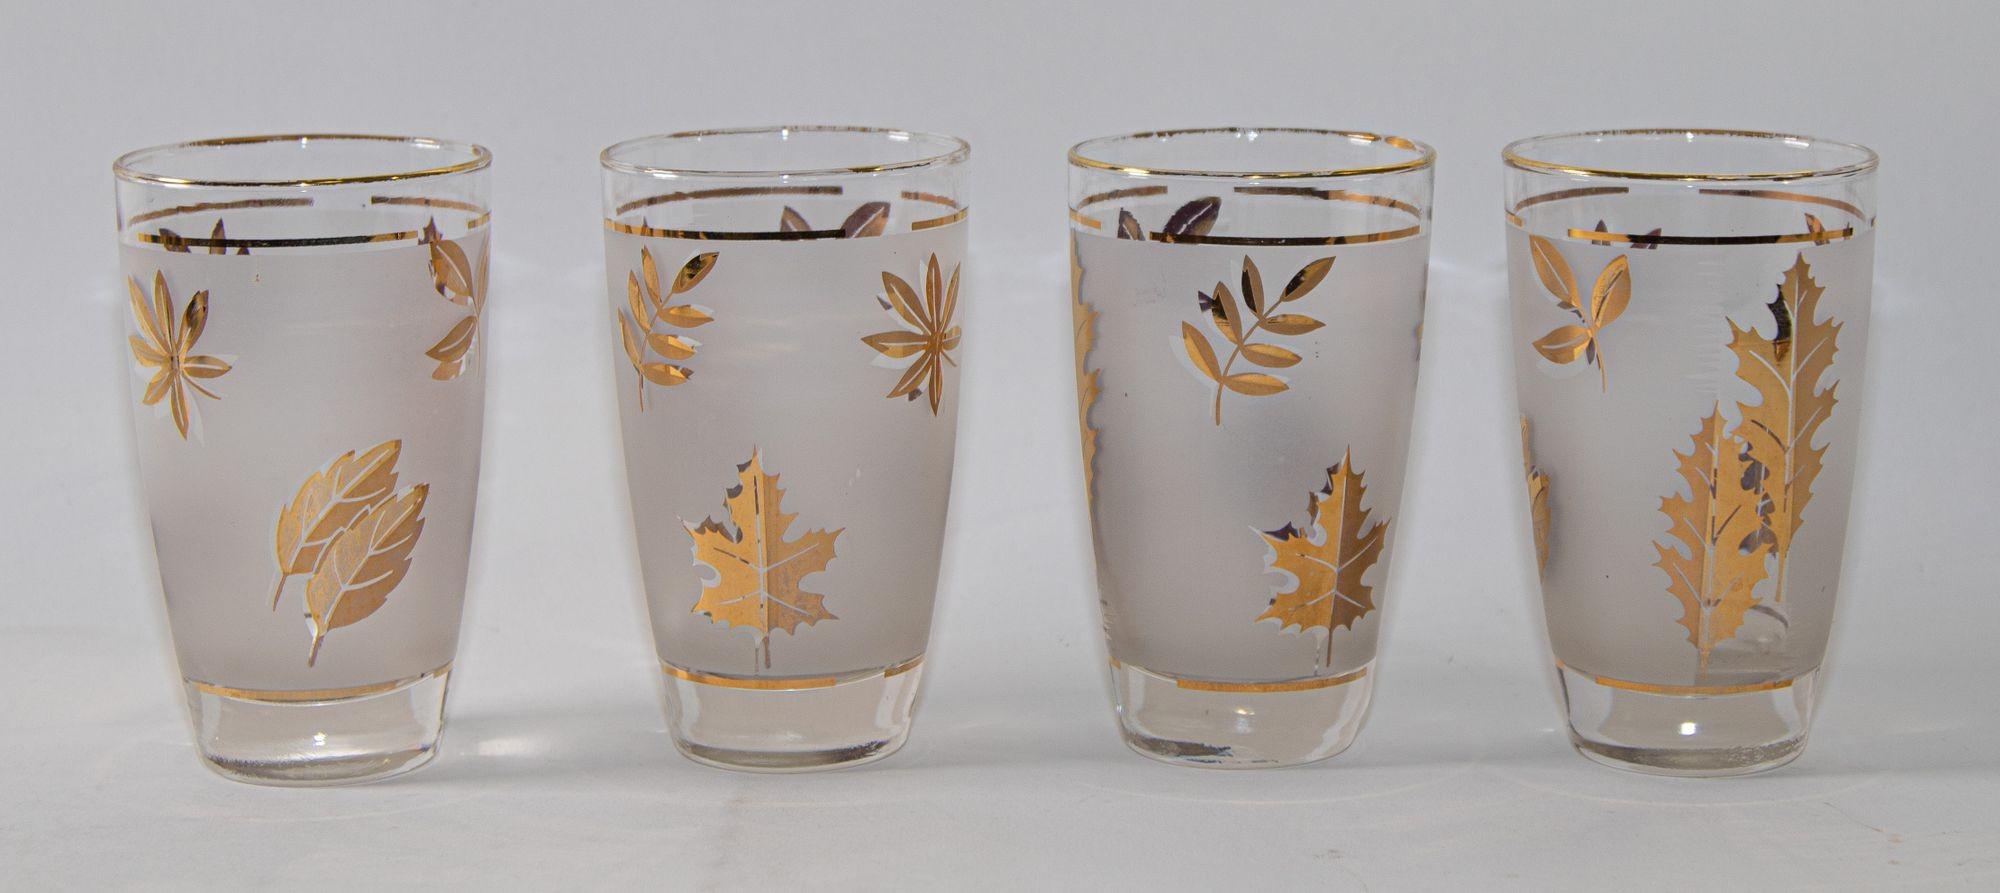 Vintage Mid-Century Modern libbey frosted & golden foliage cocktail glasses, set of 4.
Elegant vintage Libbey Golden Foliage barware frosted glasses with leaves pattern in a gold finish. Set includes 4 highball glasses.
Hollywood Regency style